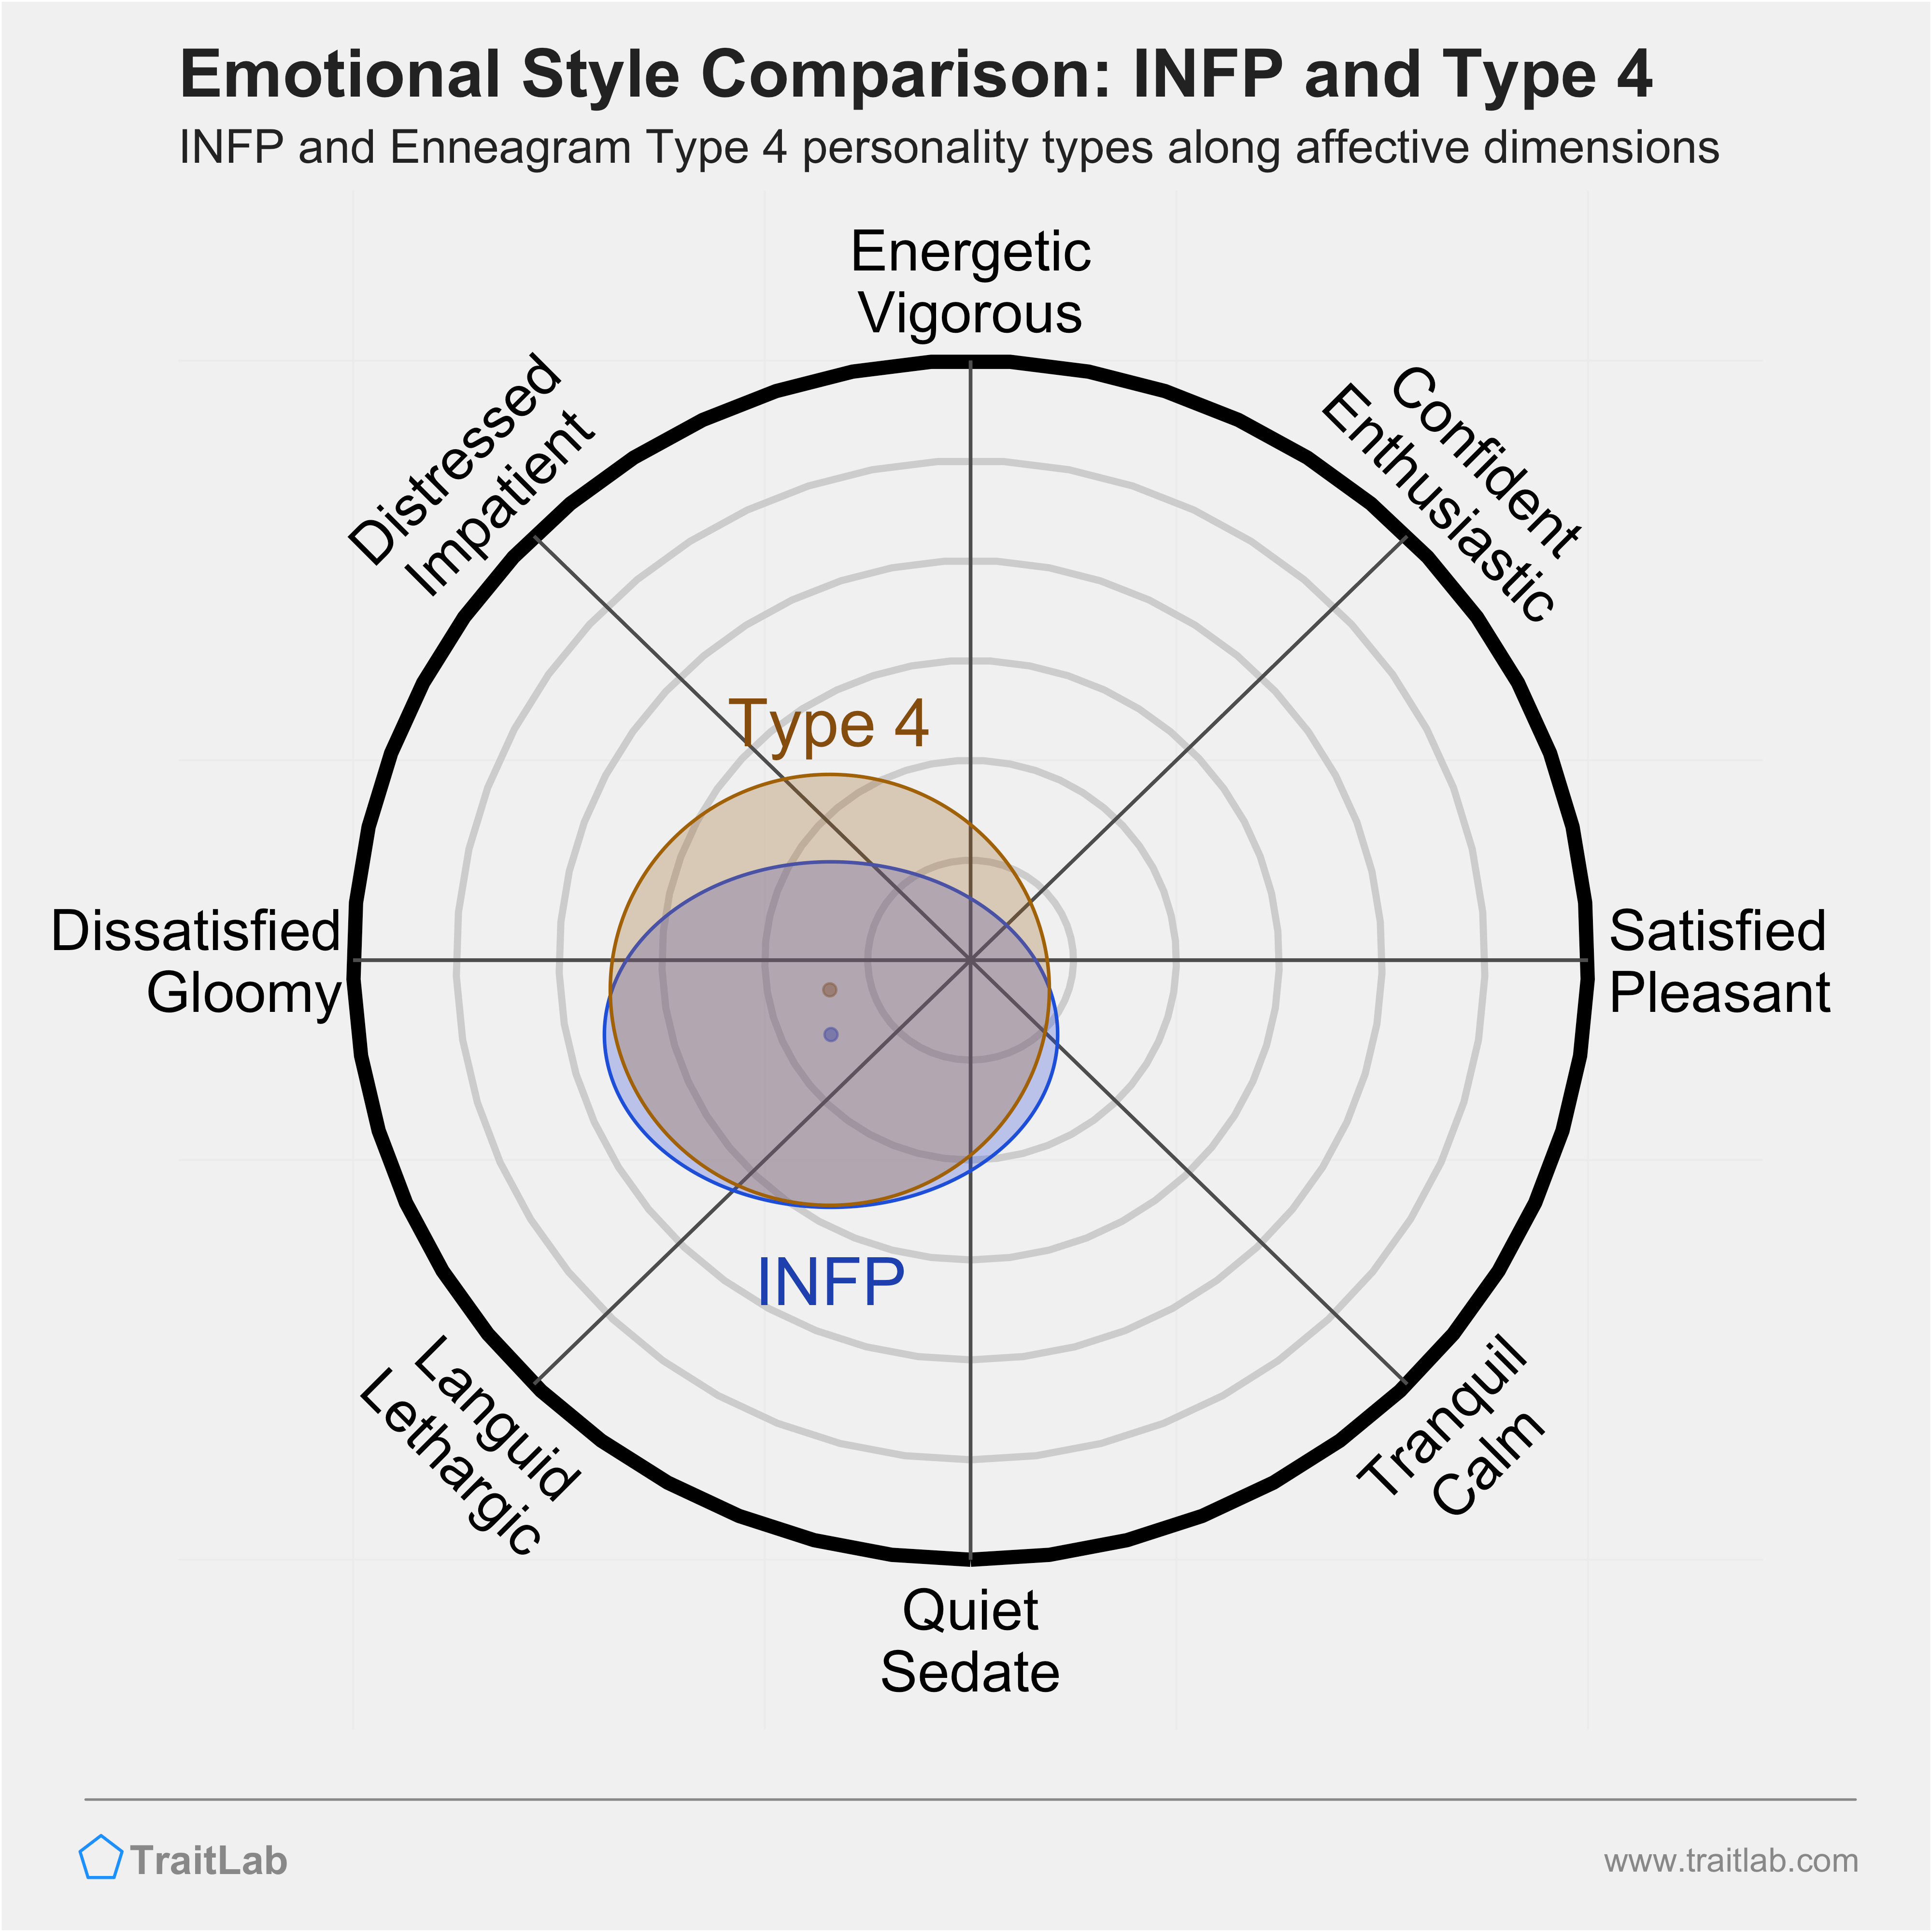 INFP and Type 4 comparison across emotional (affective) dimensions